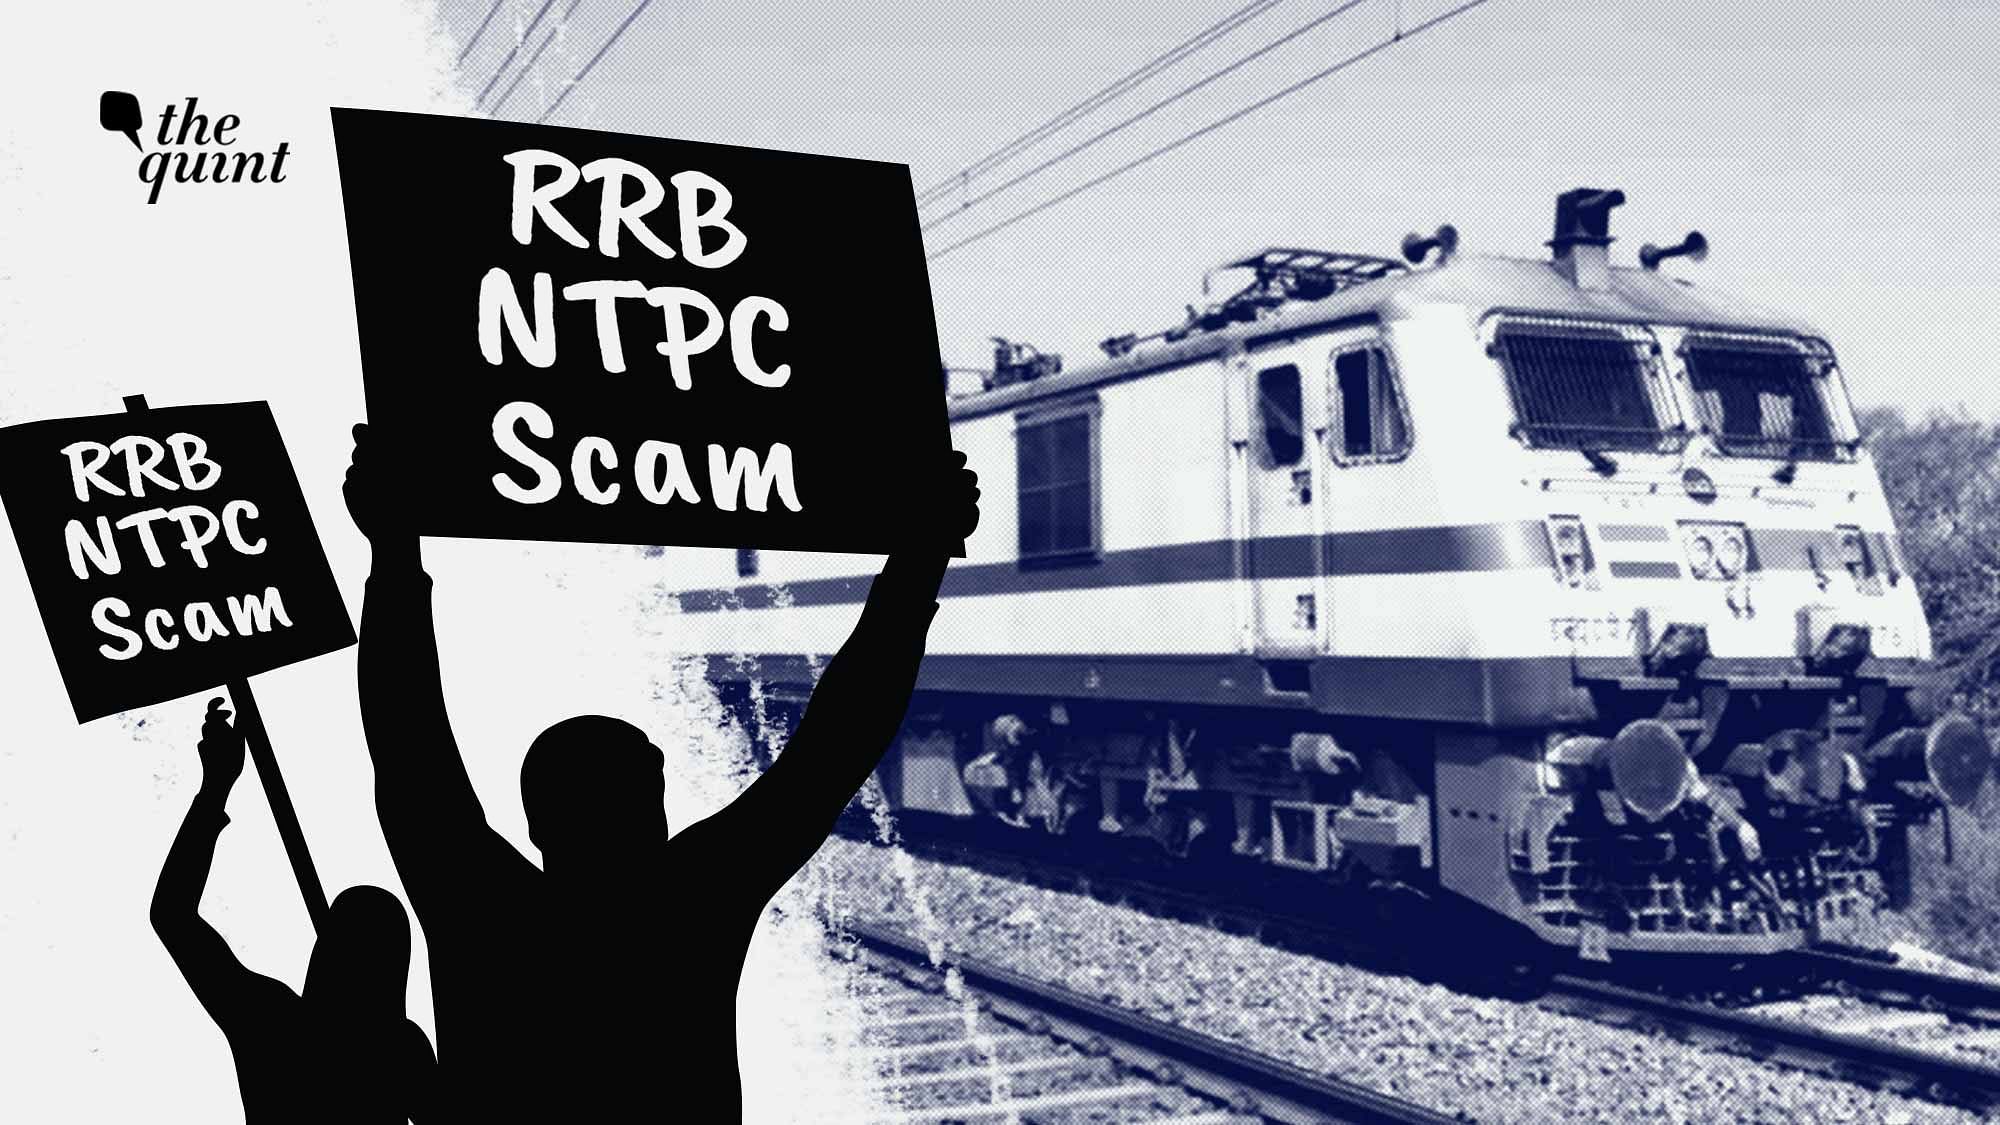 <div class="paragraphs"><p>Results for the Computer Based Test (CBT)-1 of the Railway Recruitment Board’s Non-Technical Popular Category (NTPC), as well as the shortlist for candidates picked for the CBT-2 were made public on 15 January.</p></div>